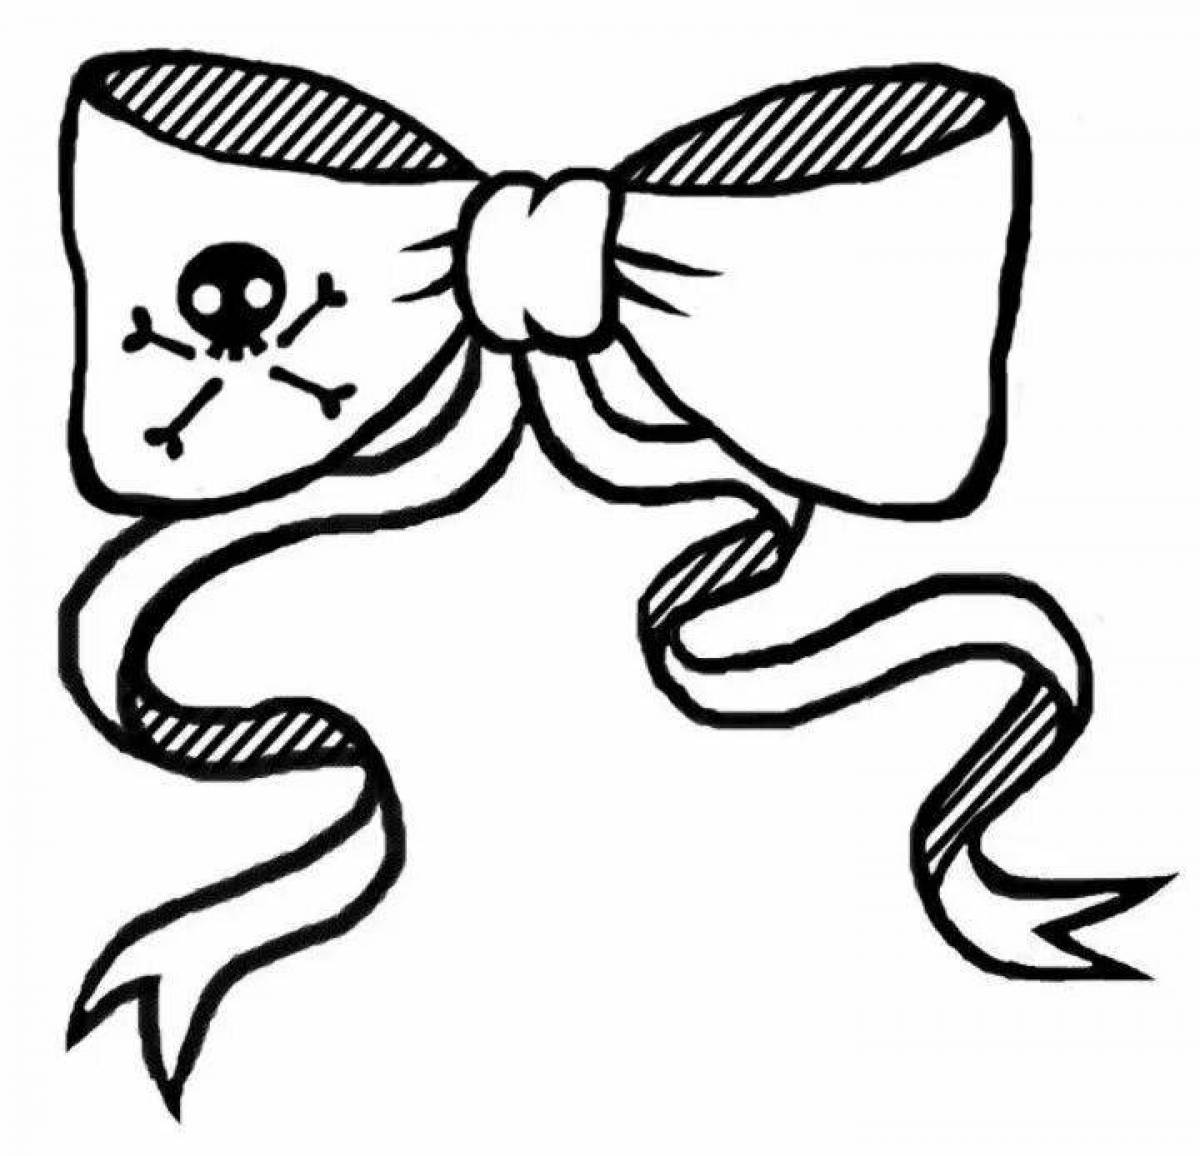 Decorated bow coloring page